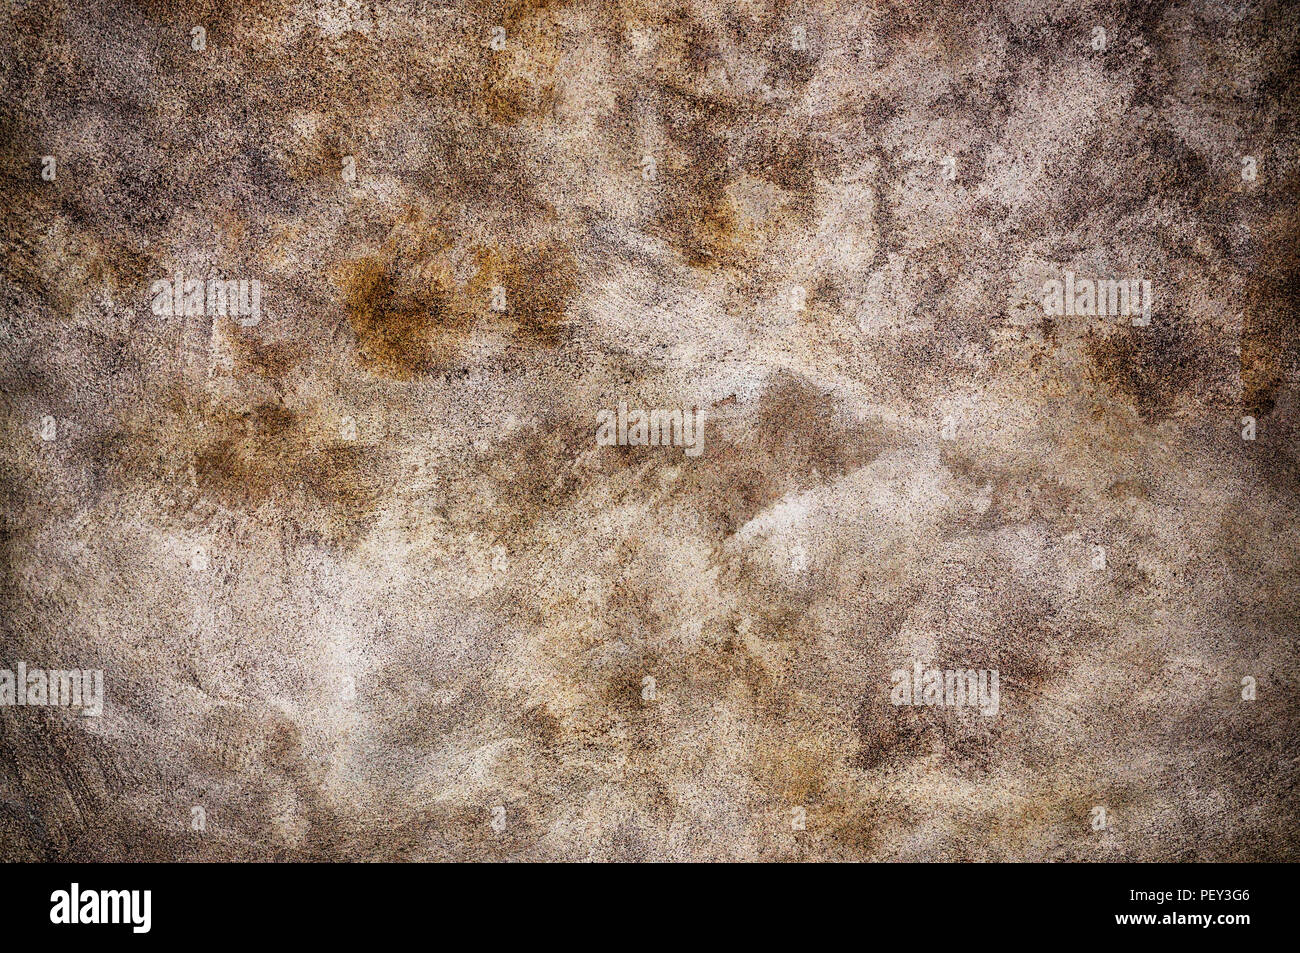 Closeup of old rough stone wall with strokes and patterns in earth colors. Stock Photo